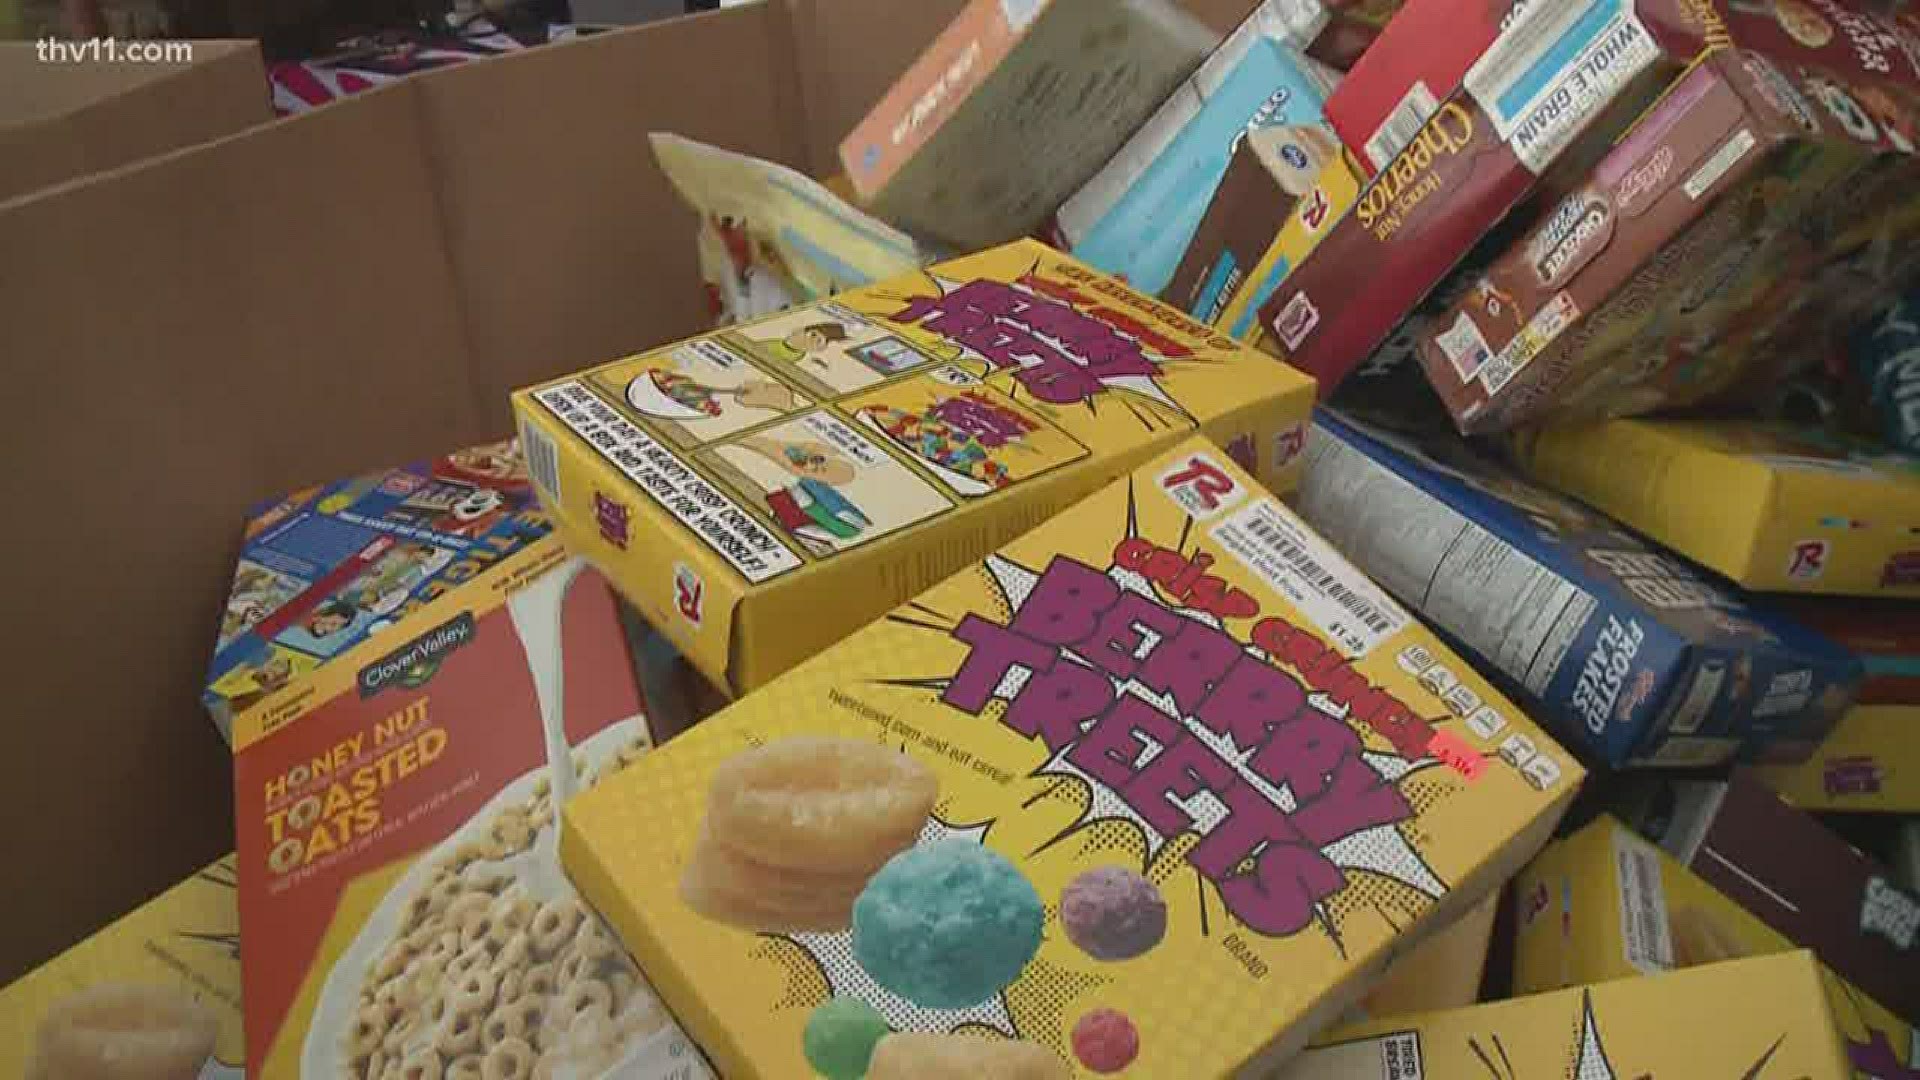 Electric Cooperatives of Arkansas continues to return each year as a major contributor to the THV11 Summer Cereal Drive benefiting the Arkansas Foodbank.